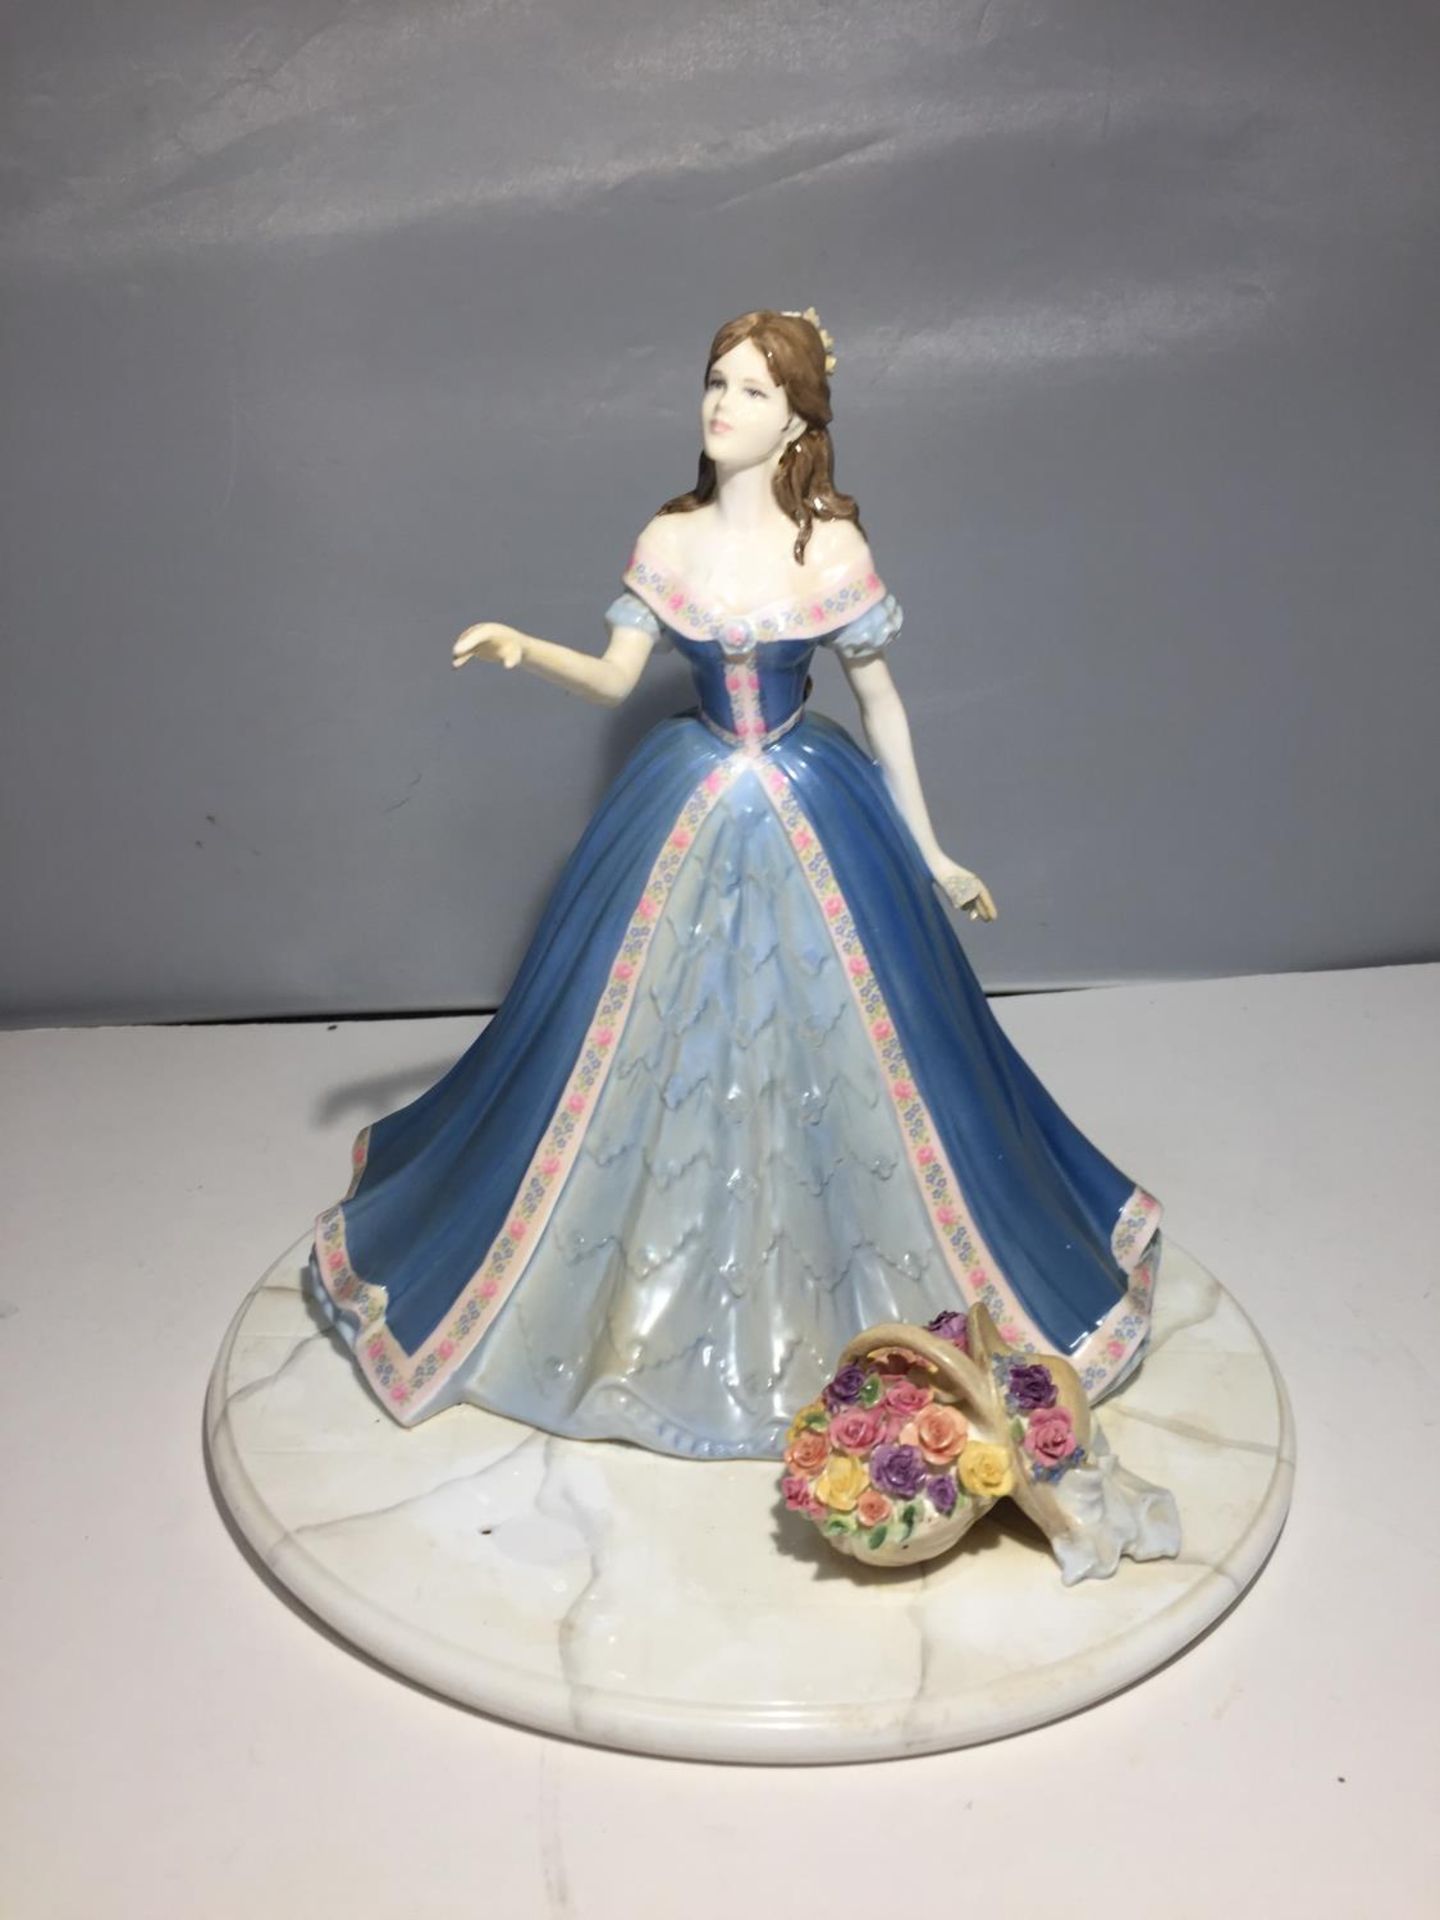 A COALPORT 'ROSE TERRACE' FIGURE 26CM TALL (A/F; MISSING THE JARDINAIRE AND FLOWERS THAT THE HAND IS